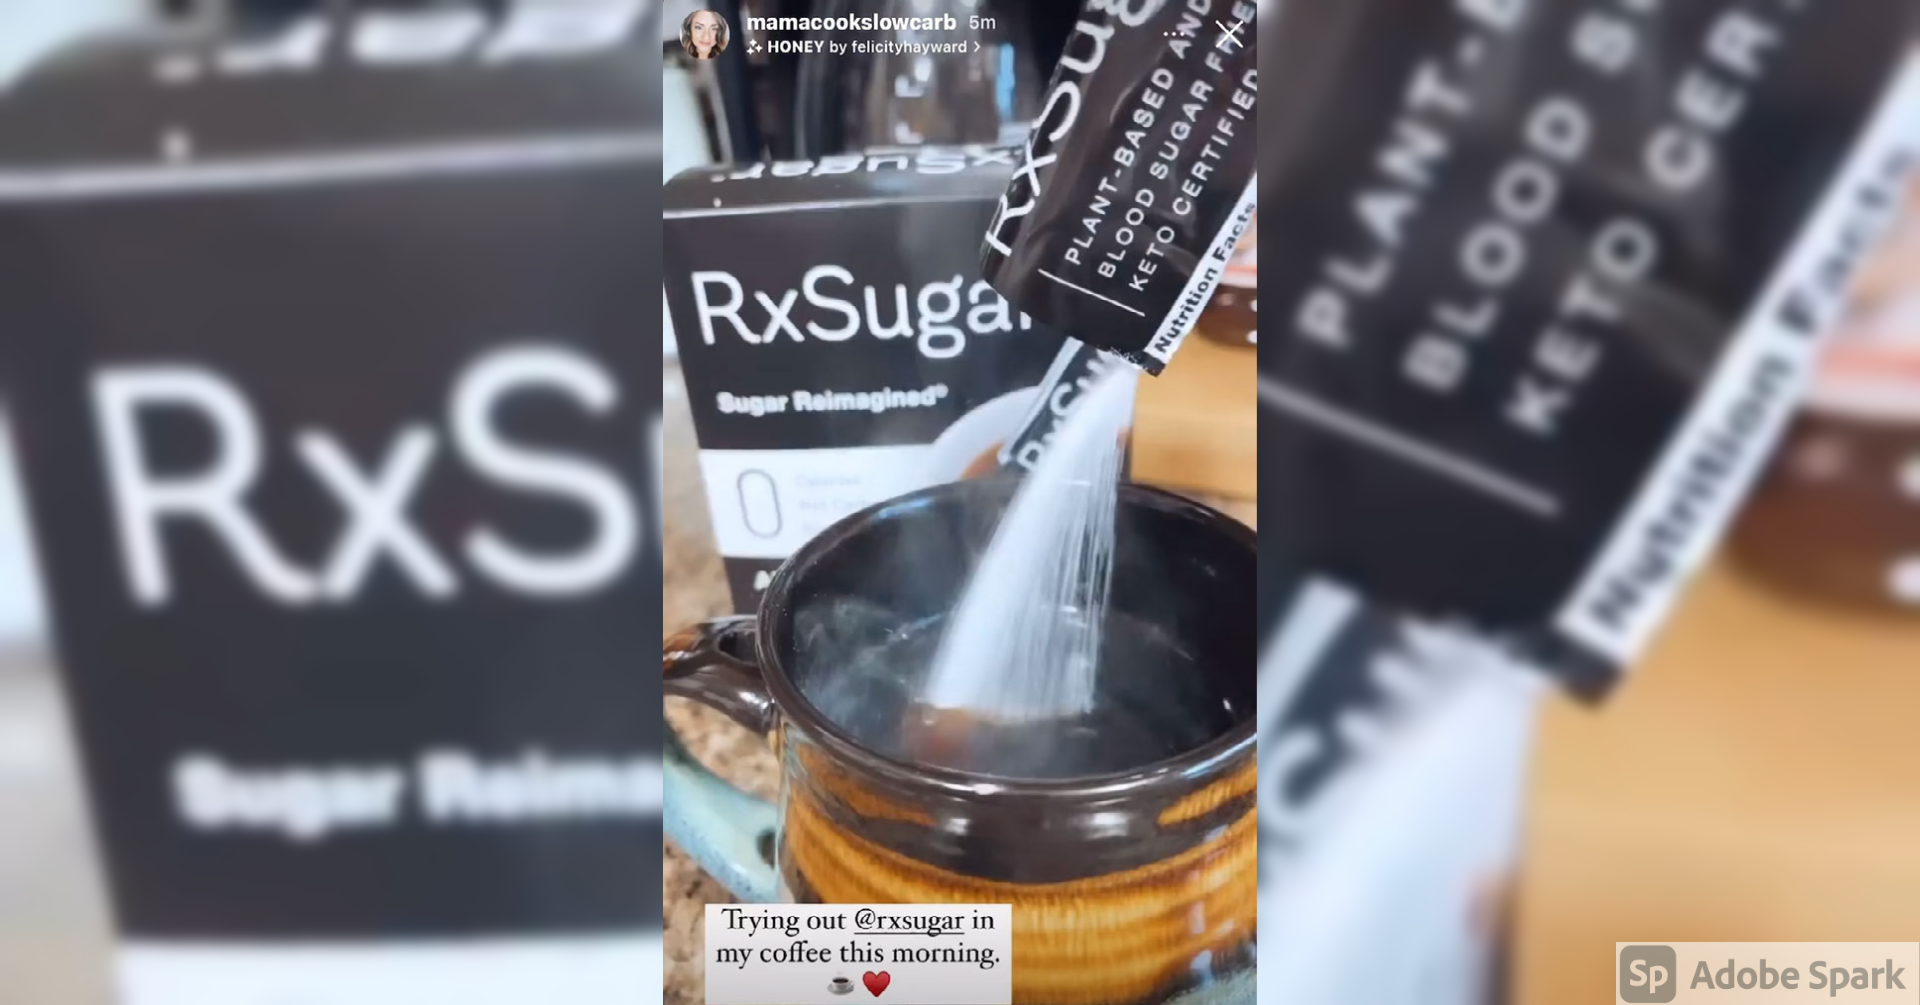 Mamacookslowcarb Using Her RxSugar Stick Packs In Her Morning Brew